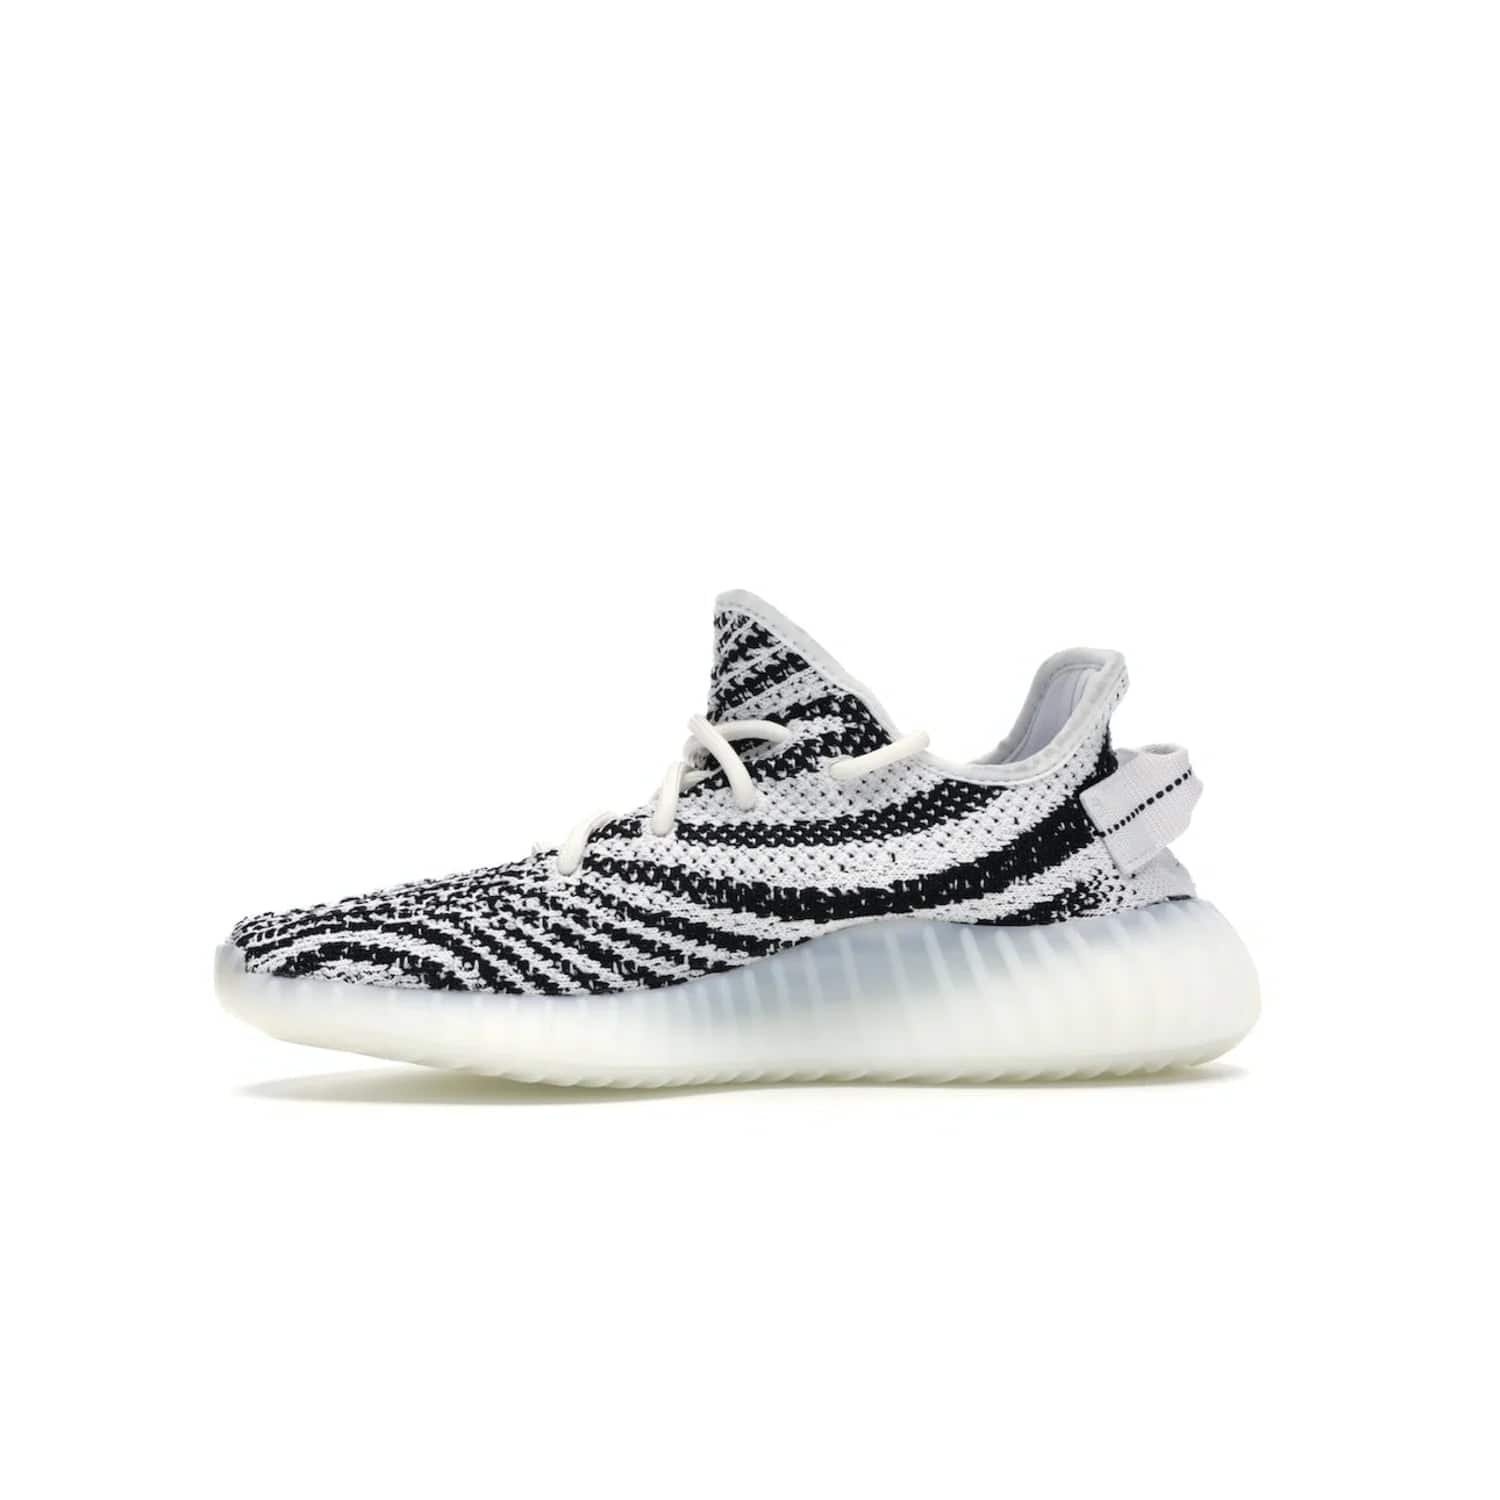 adidas Yeezy Boost 350 V2 Zebra - Image 18 - Only at www.BallersClubKickz.com - #
Score the iconic adidas Yeezy Boost 350 V2 Zebra for a fashionable addition to your street-style. Featuring a Primeknit upper and Boost sole, you'll look great and feel comfortable with every step.